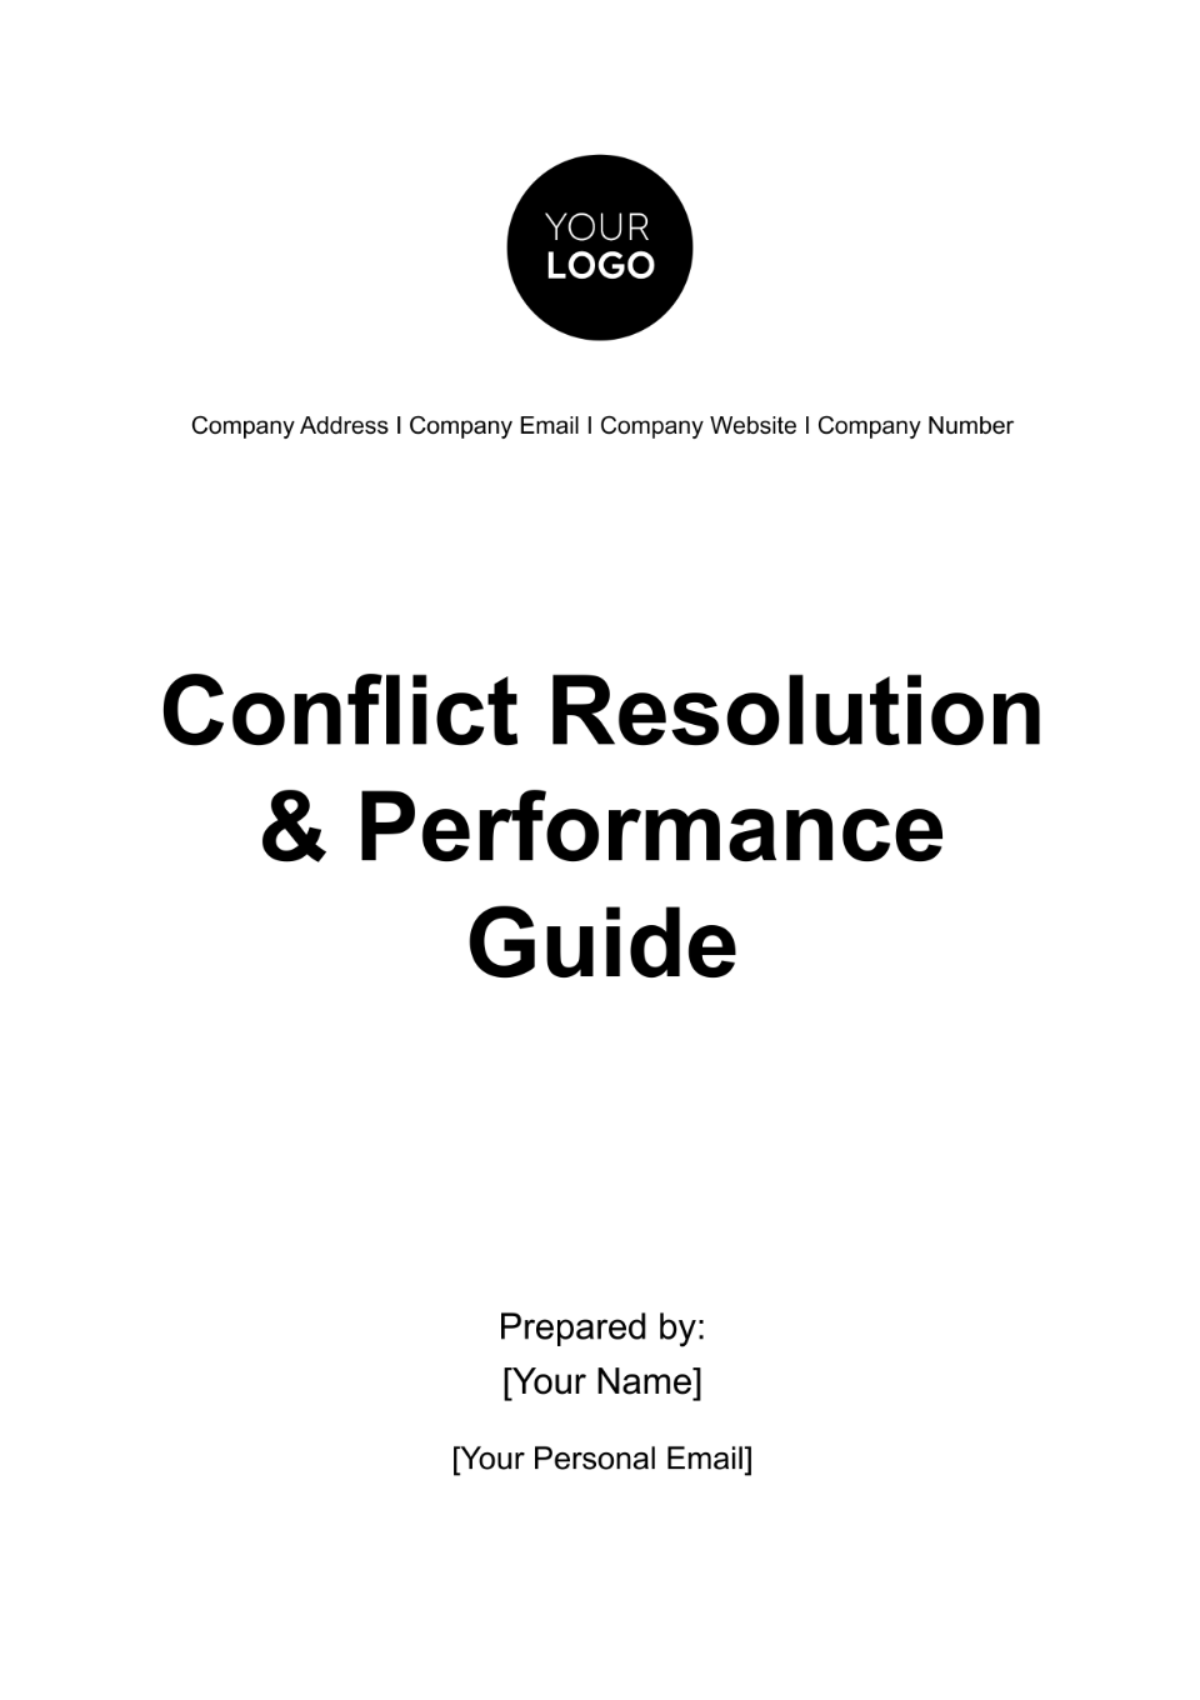 Free Conflict Resolution & Performance Guide HR Template